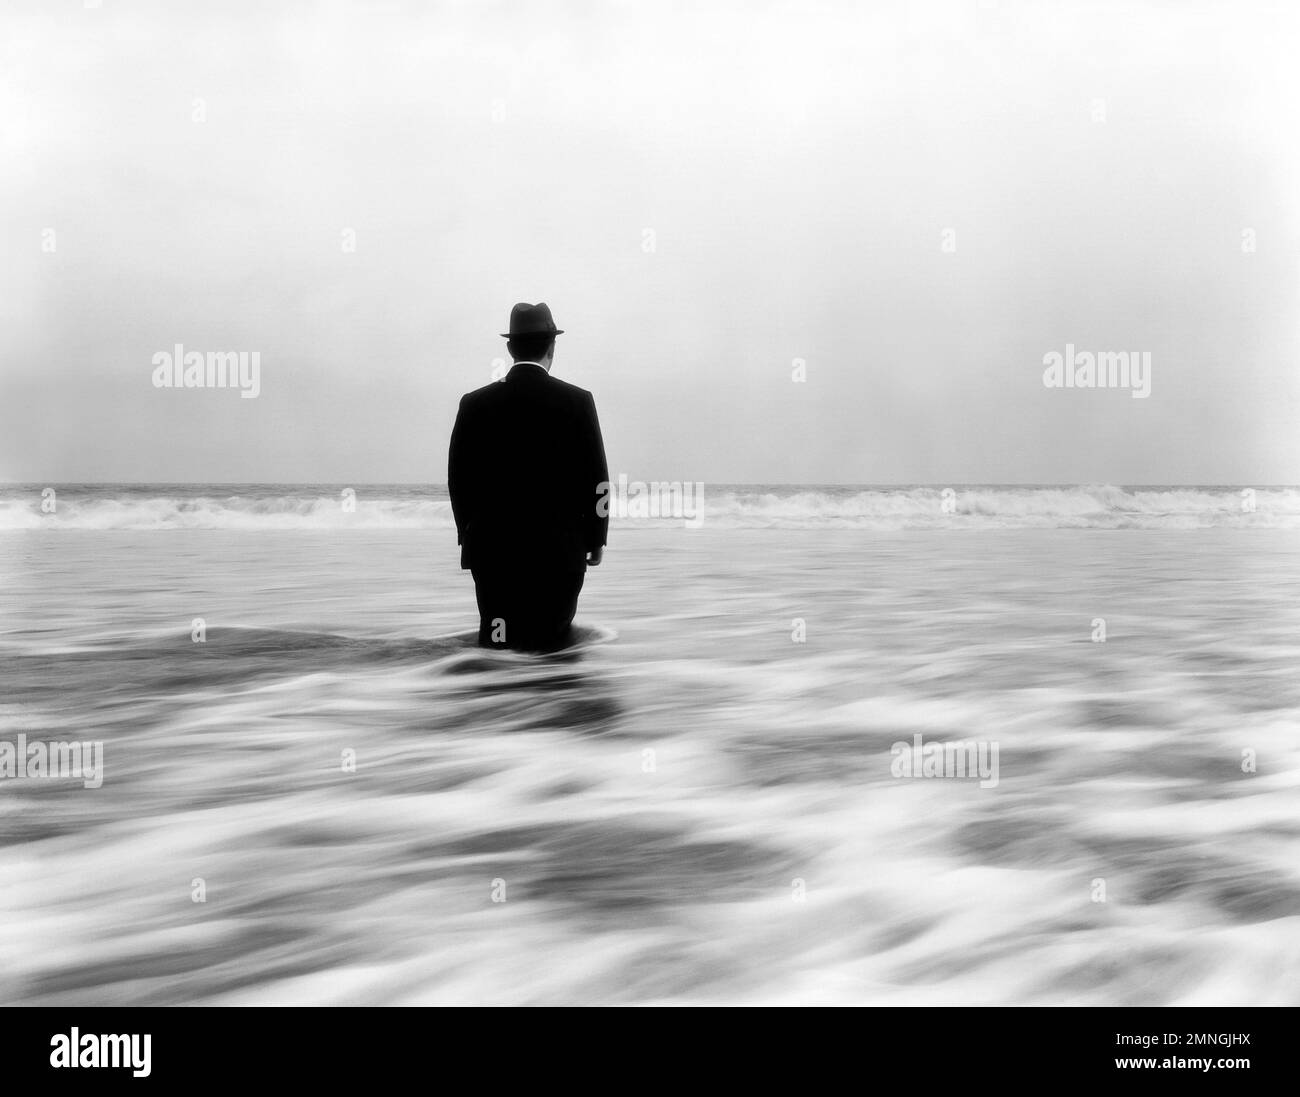 Rear View of Mid-Adult Man in Suit and Hat standing Knee-Deep in Ocean Water Stock Photo